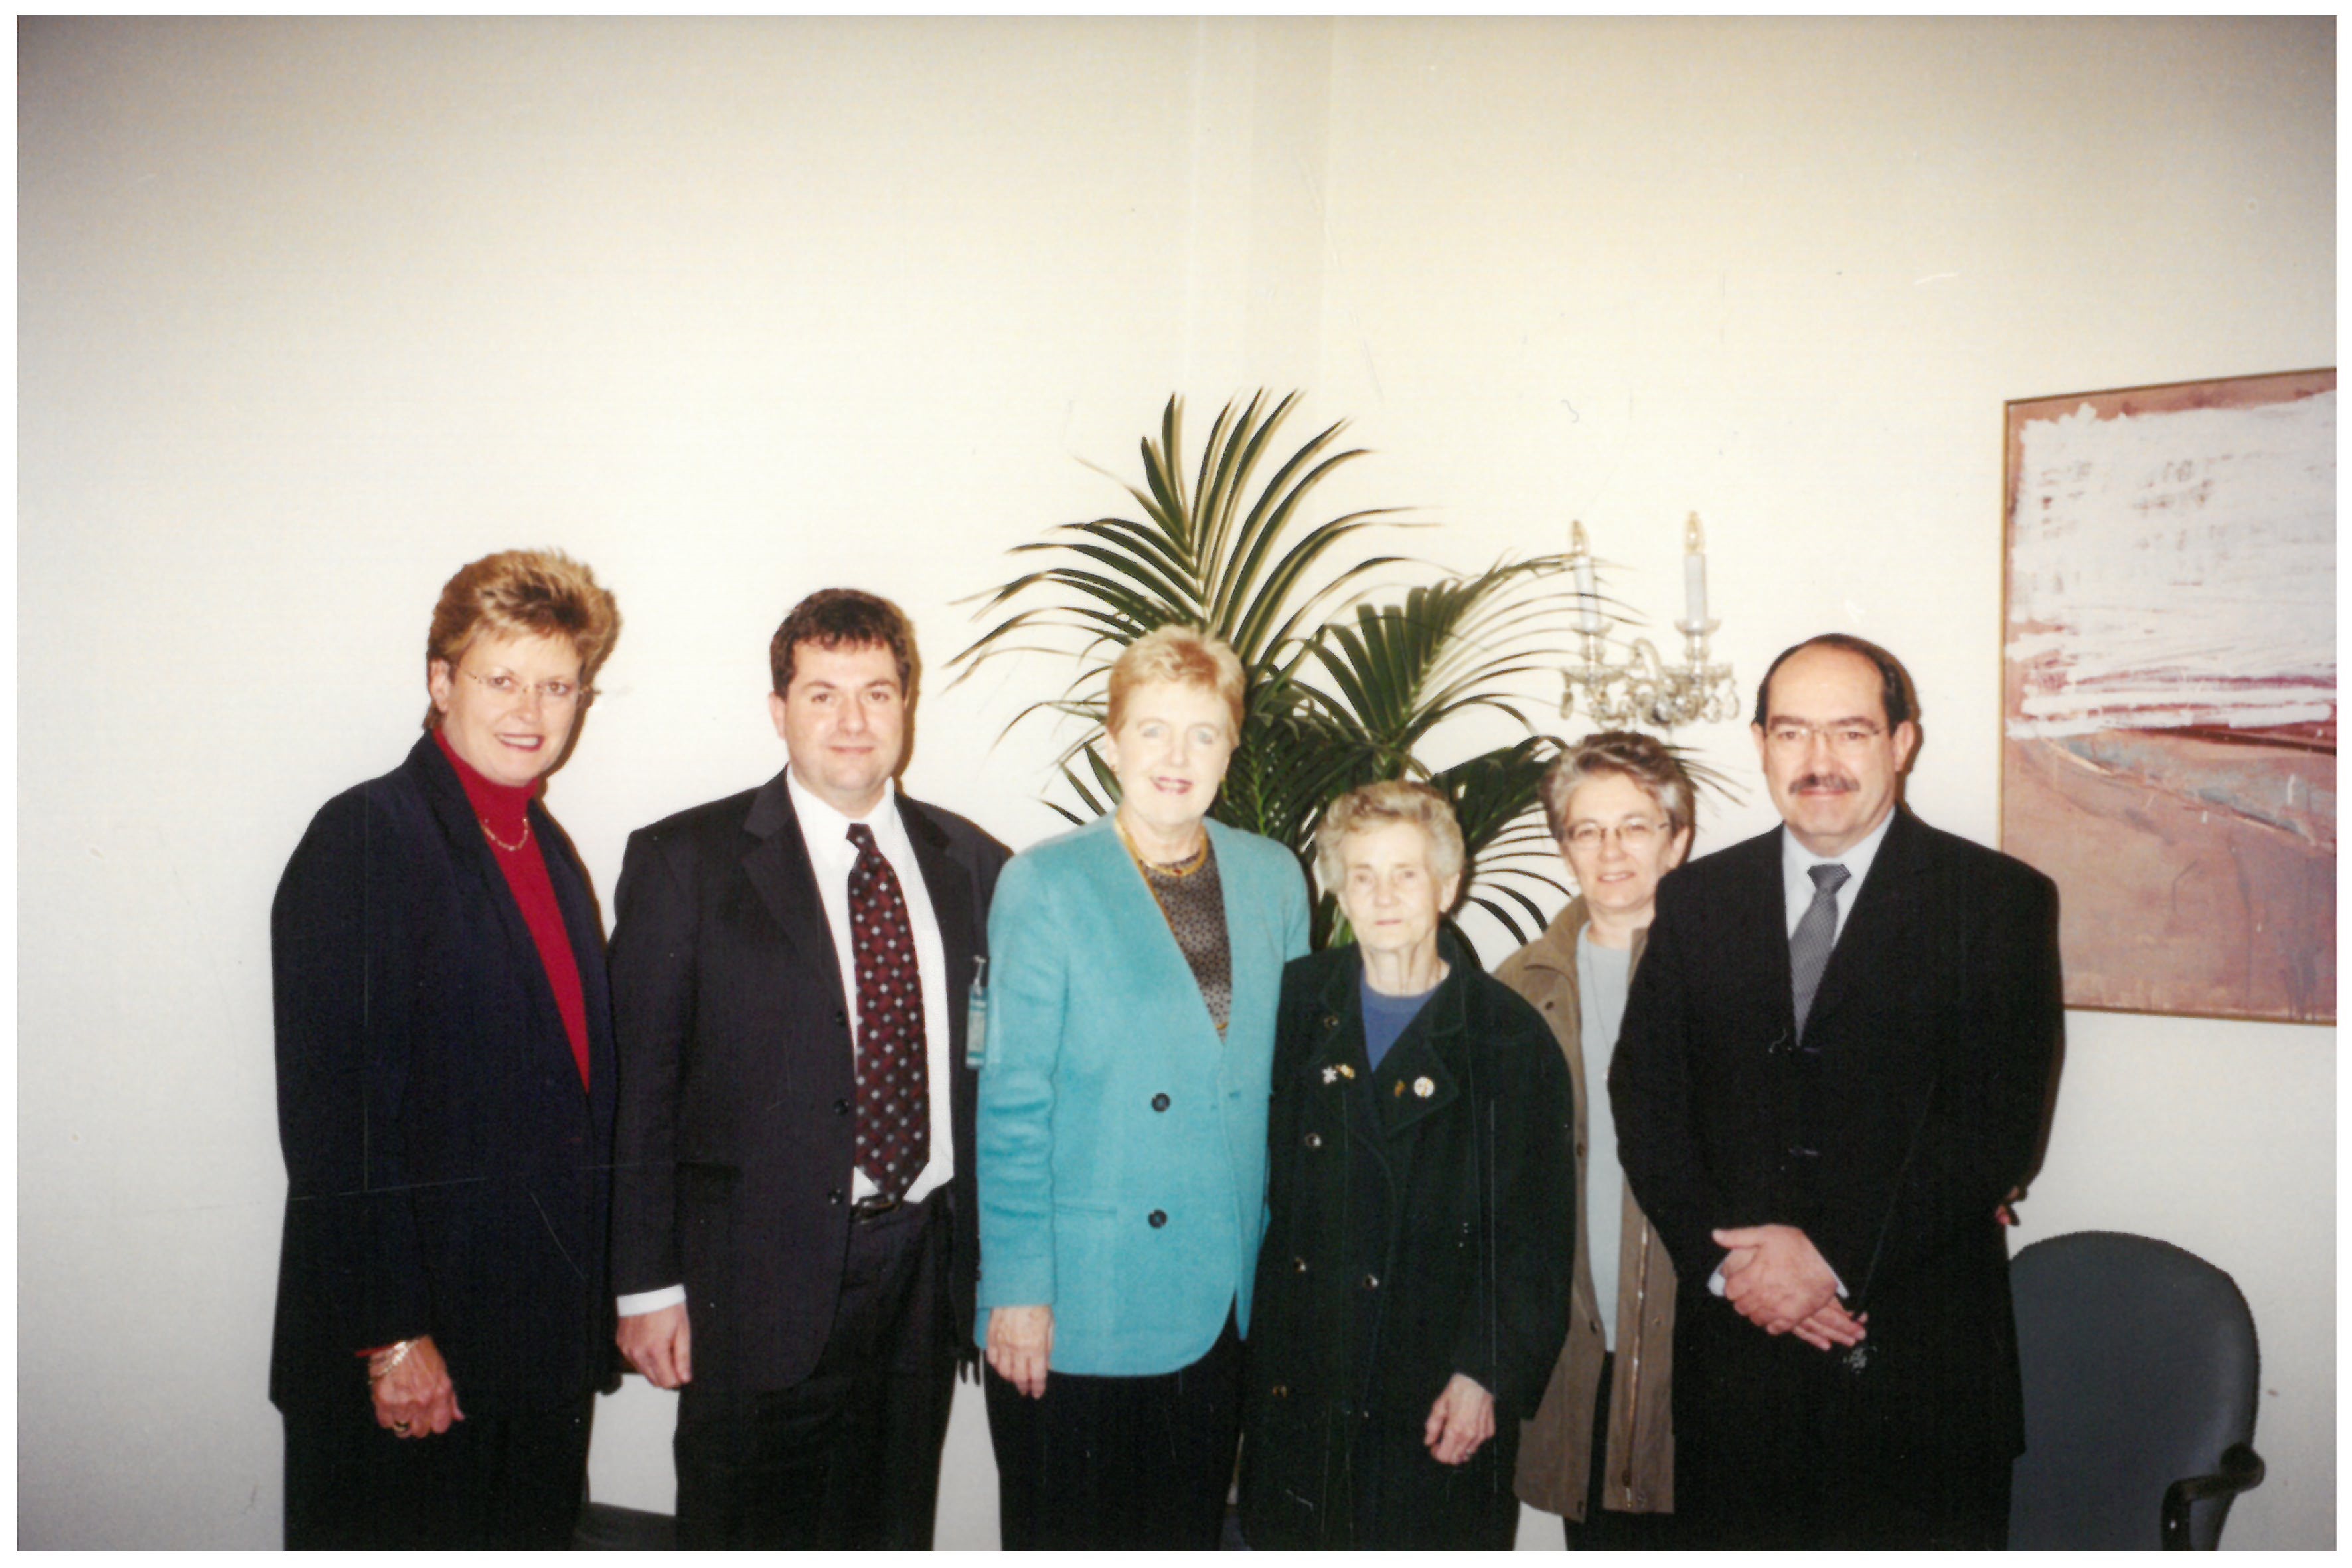 Committee members meeting with Rose and Sylvia Coulson, the mother and sister of child migrants who were all reunited under the travel scheme, 20 April 2001. L-R: Senator Sue Knowles [Deputy Chair], Ian Thwaites [Senior Social Worker, Child Migrants Trust], Senator Rosemary Crowley [Delegation Leader; Chair], Rose Coulson, Sylvia Coulson and Senator Andrew Murray.